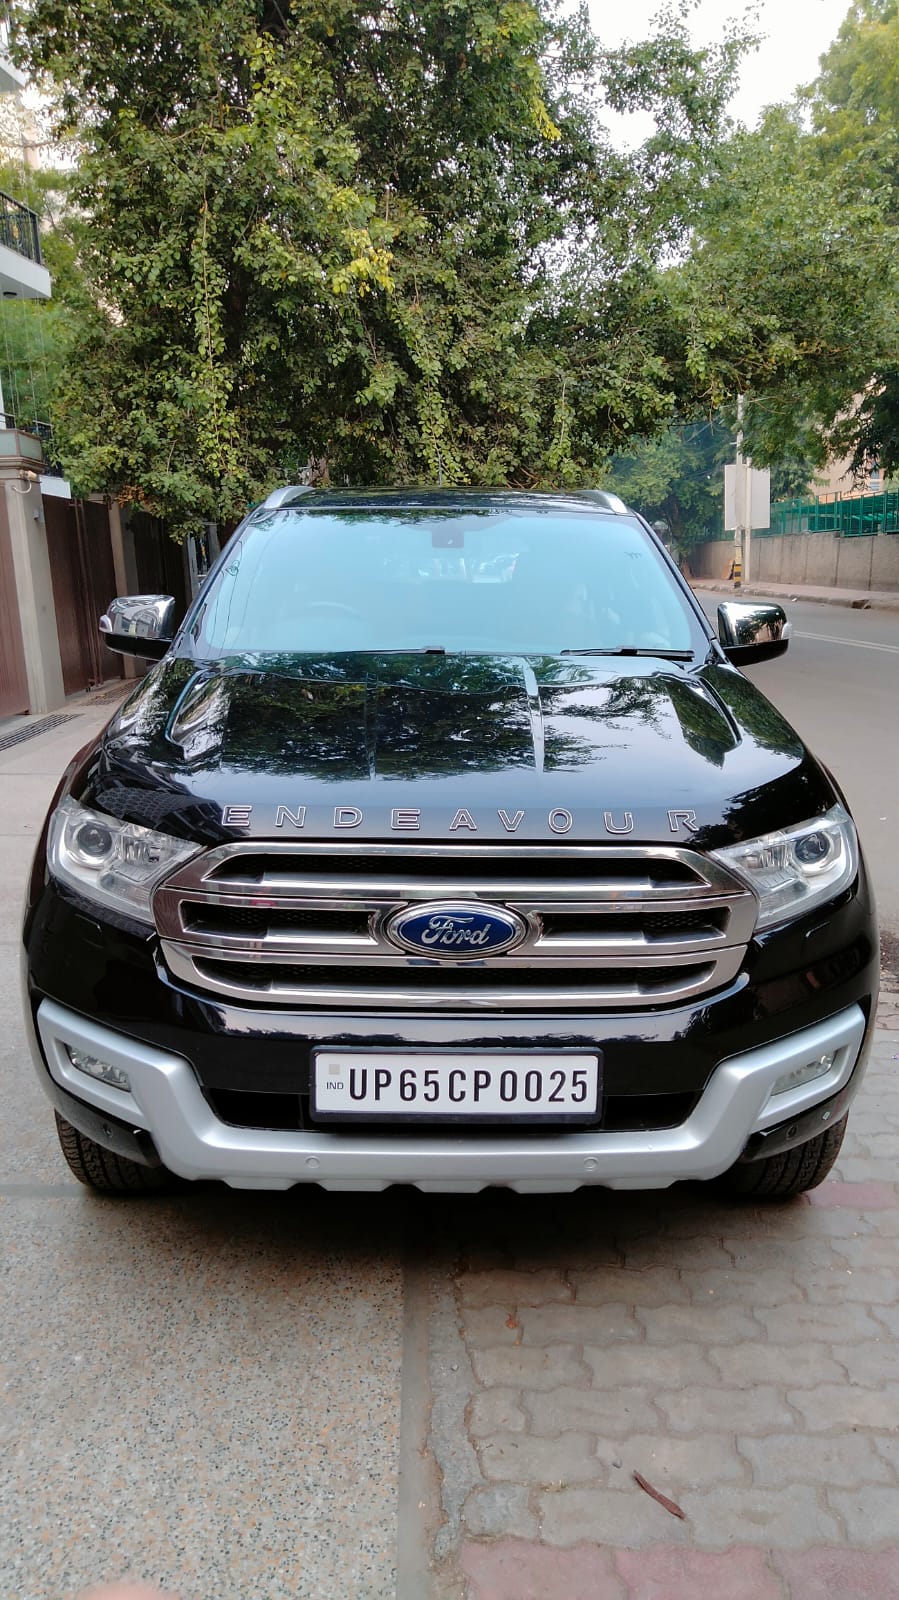 FOR SALE FORD ENDEAVOUR 3.2 TITANIUM 4×4 AUTOMATIC CAR DIESAL MODAL 2017 VIP NO CAR 1ST OWNER CAR KMS 52775 WITH COMPANY SERVICE HISTORY LAST SERVICE 52720 KMS FORD COMPANY FIRST TIME TYERS CHANGE LAST MONTH NEW BATTERY 2ND KEY AVAILABLE ALL ORIGINAL PAINT CAR SCRECHLESS CAR Jolly chittranjan park South delhi nehru place